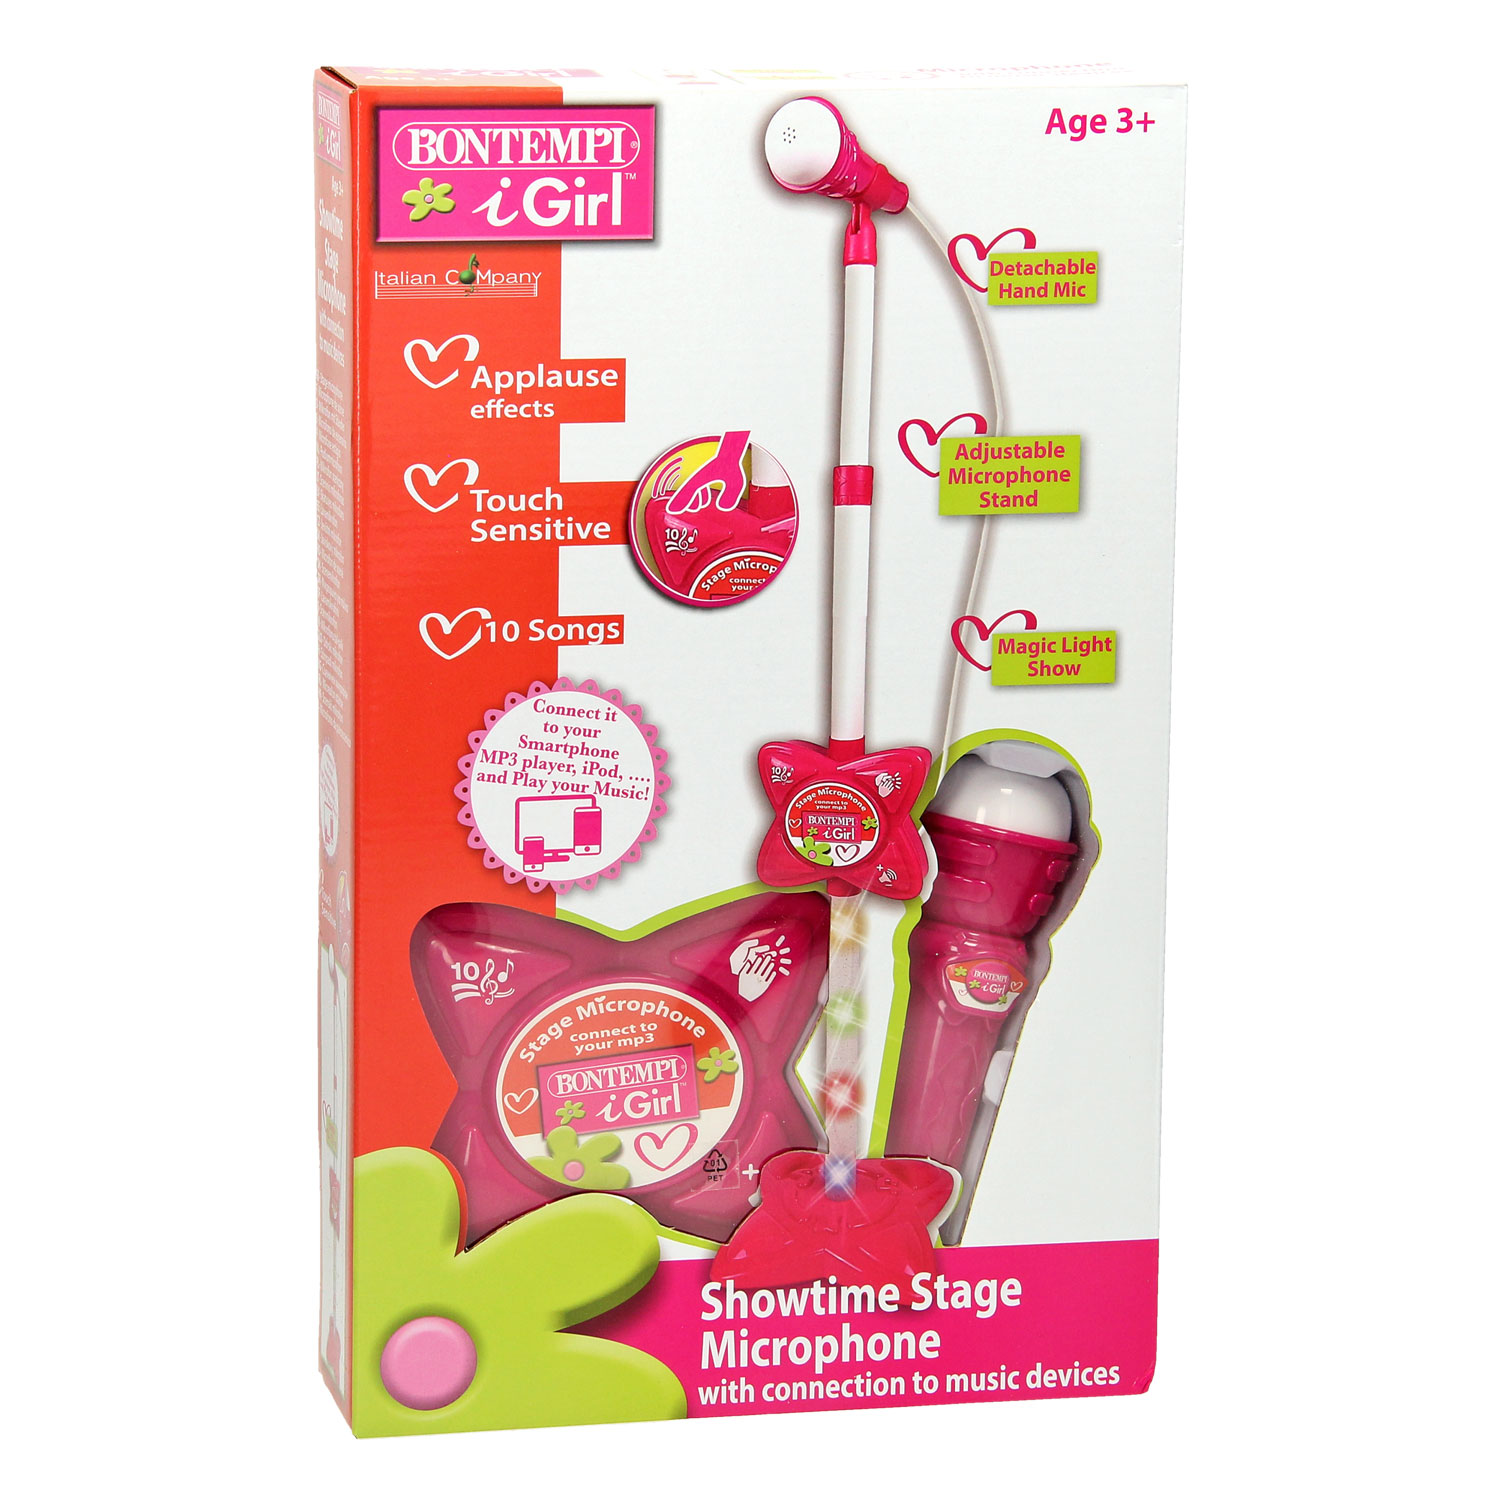 Wholesale Barbie Toy Microphone & Guitar Set For Girls licensed to